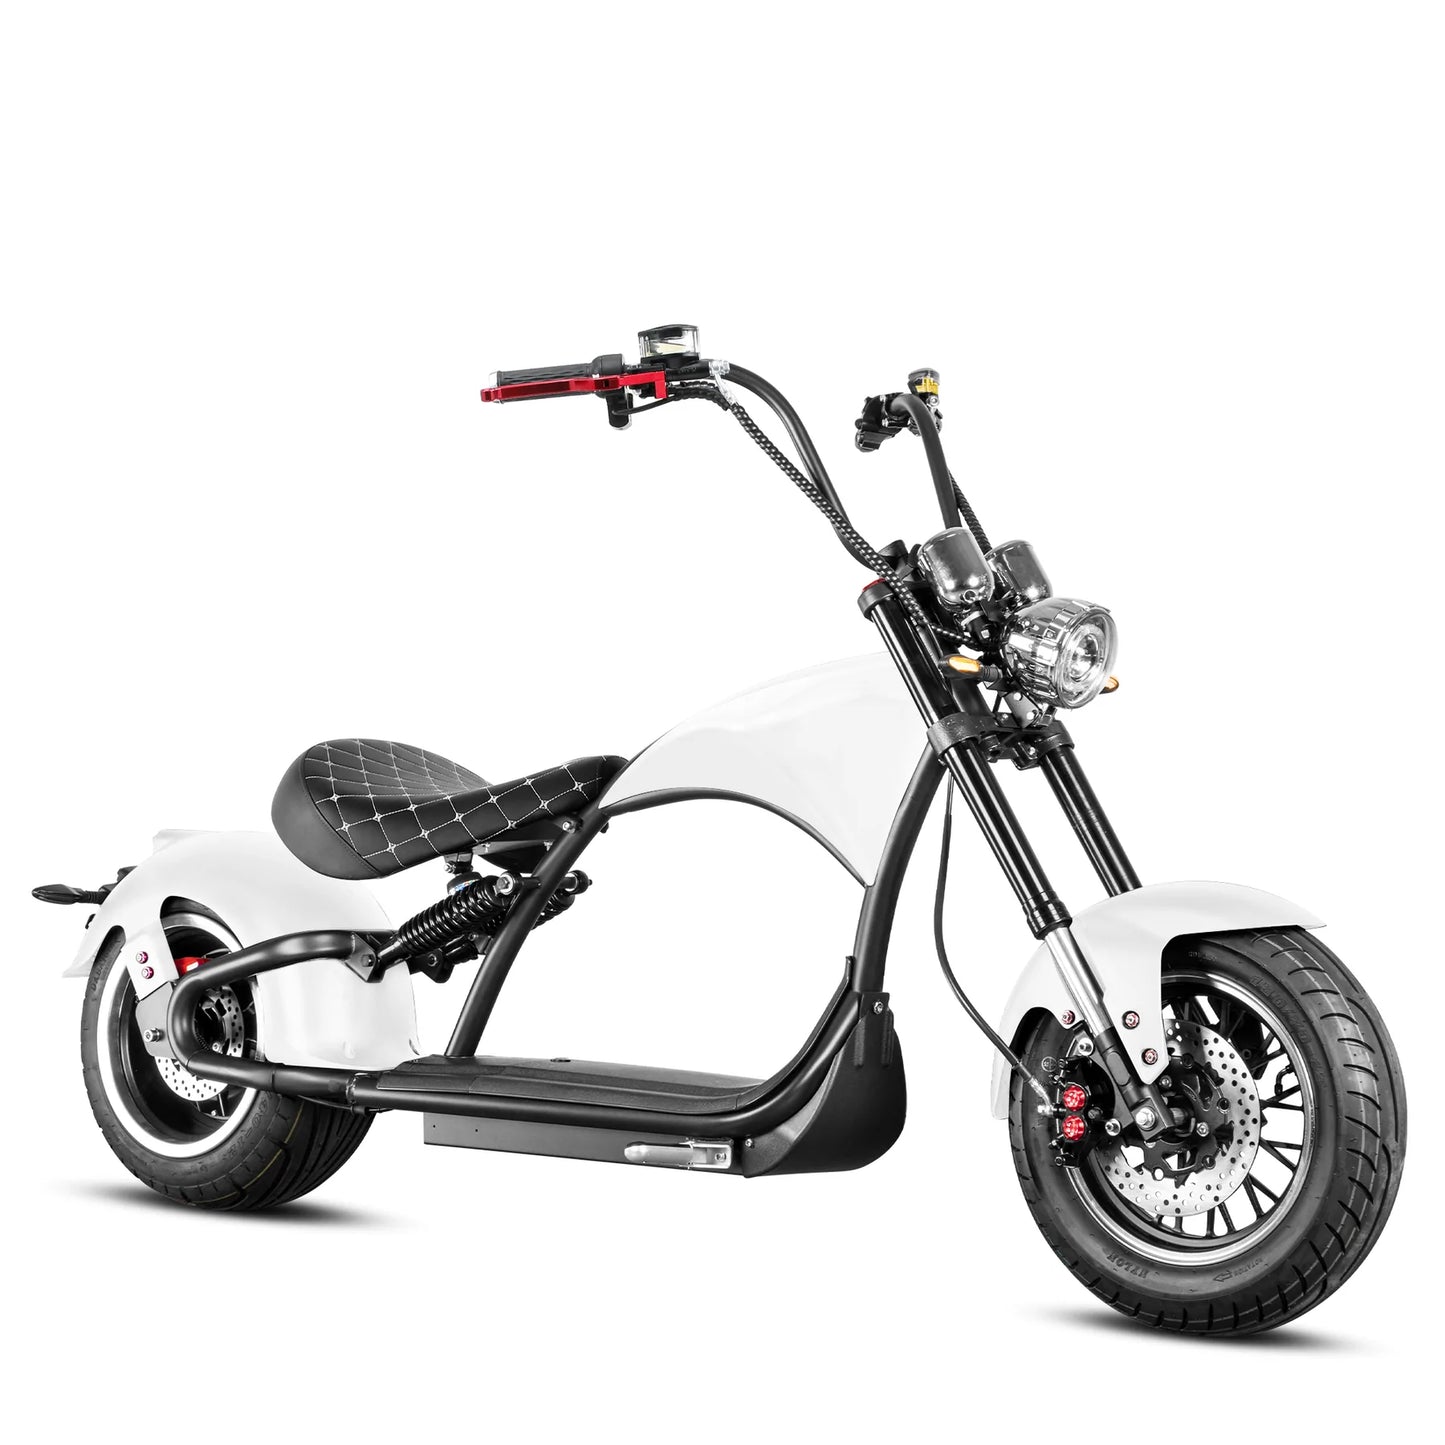 Eahora Emars M1P Electric Scooter - White | Bike Lover USA